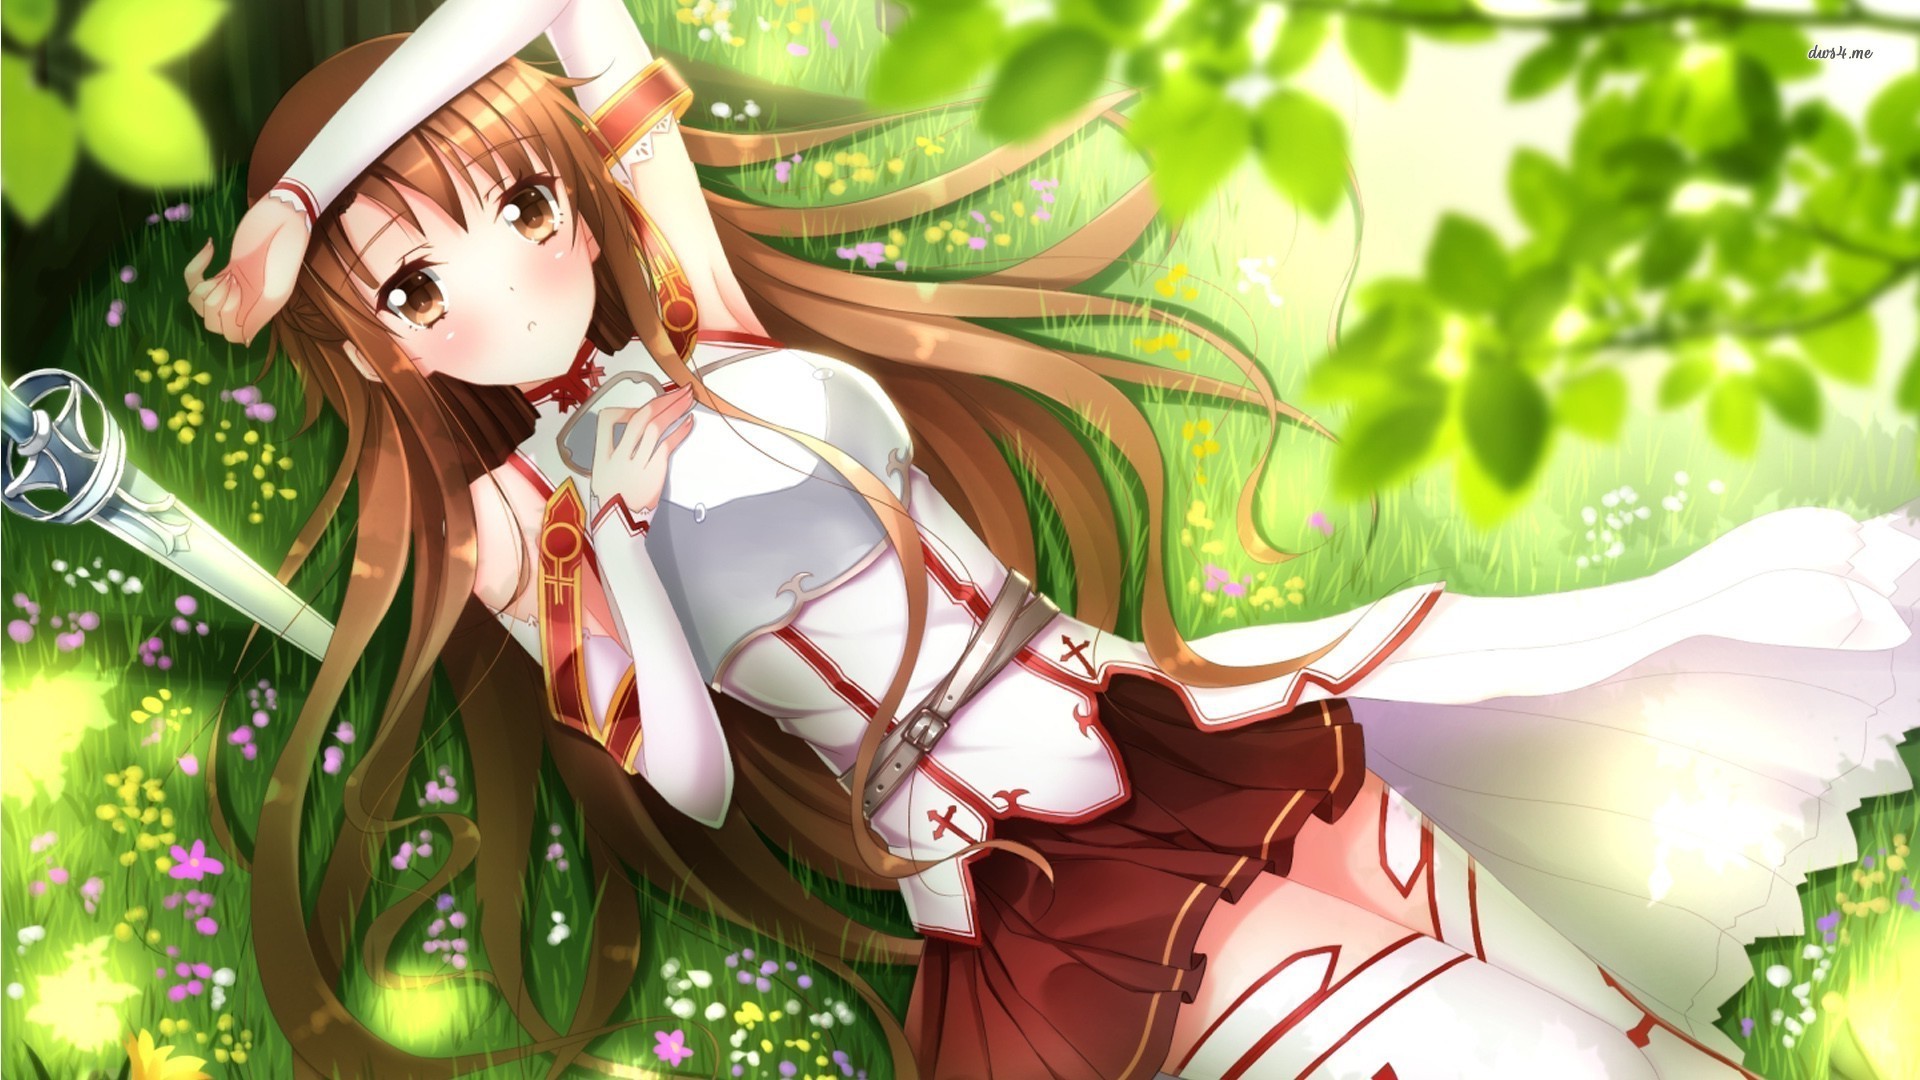 1920x1080 Kirito and Asuna Wallpaper by hitsuhinabby on DeviantArt. Find this Pin and  more on Sword Art Online ...